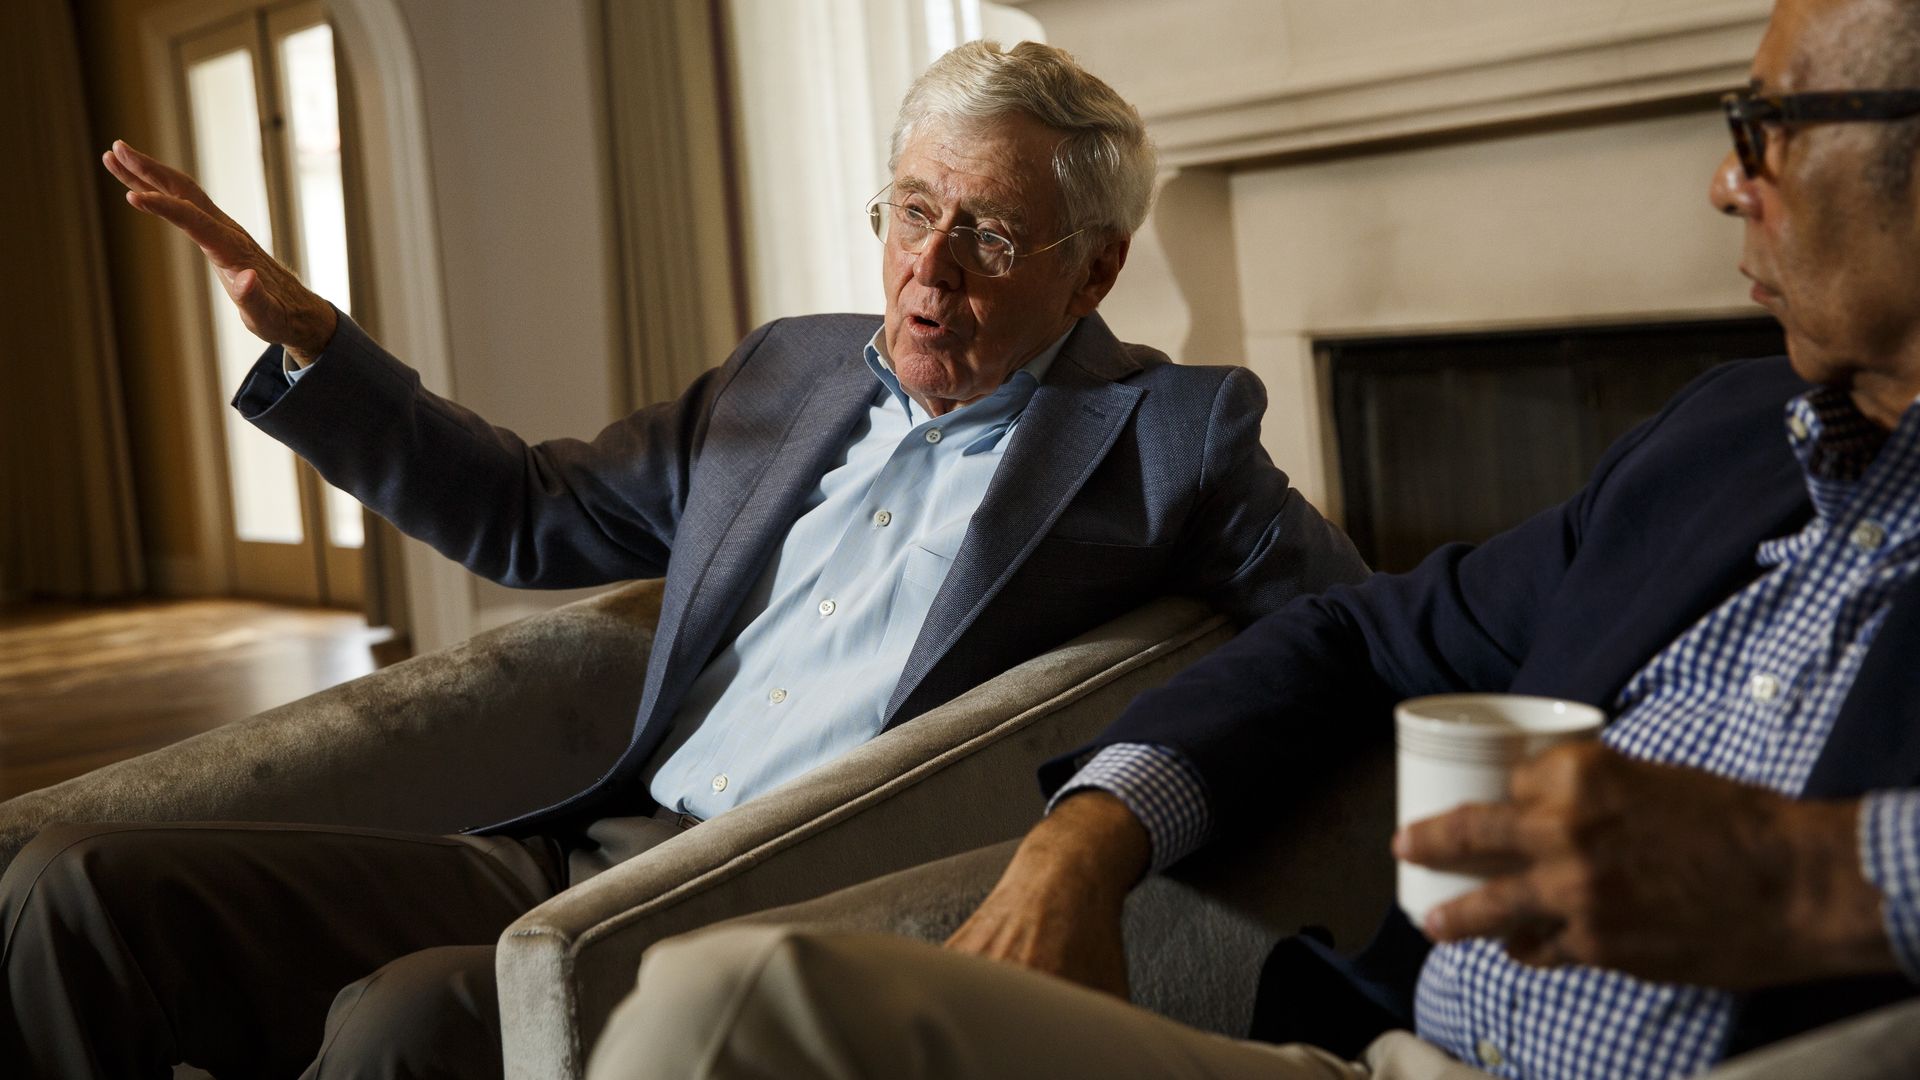 In this image, Charles Koch sits and gestures while talking.